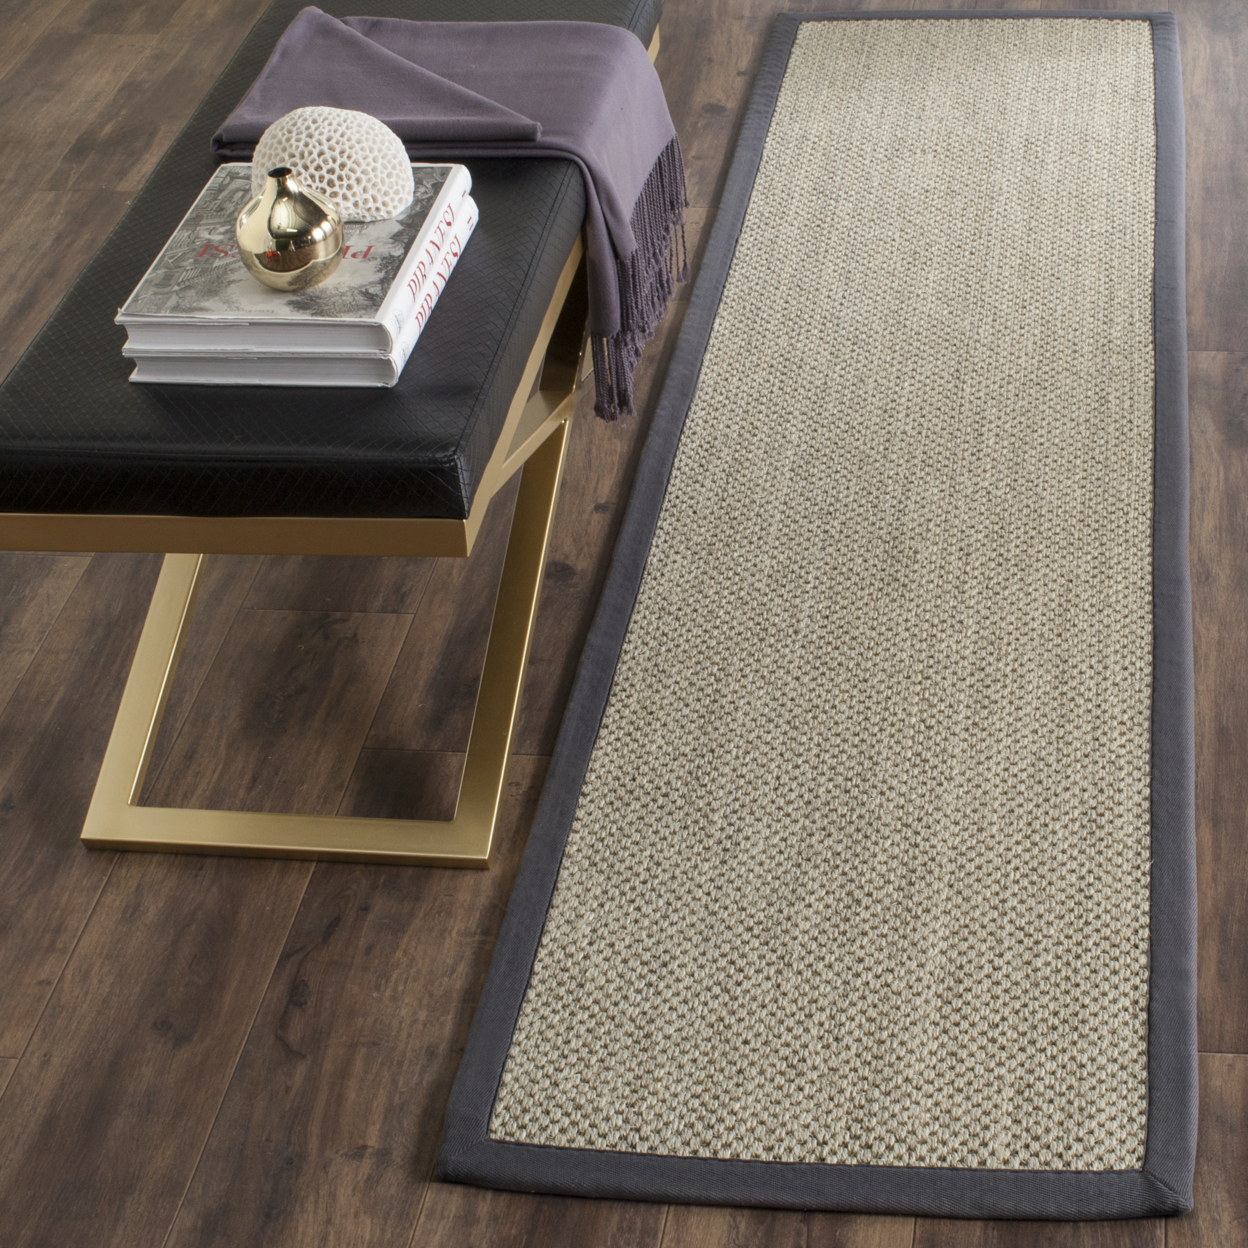 SAFAVIEH Natural Fiber Collection NF443B Marble/Grey Rug - 2' X 12'